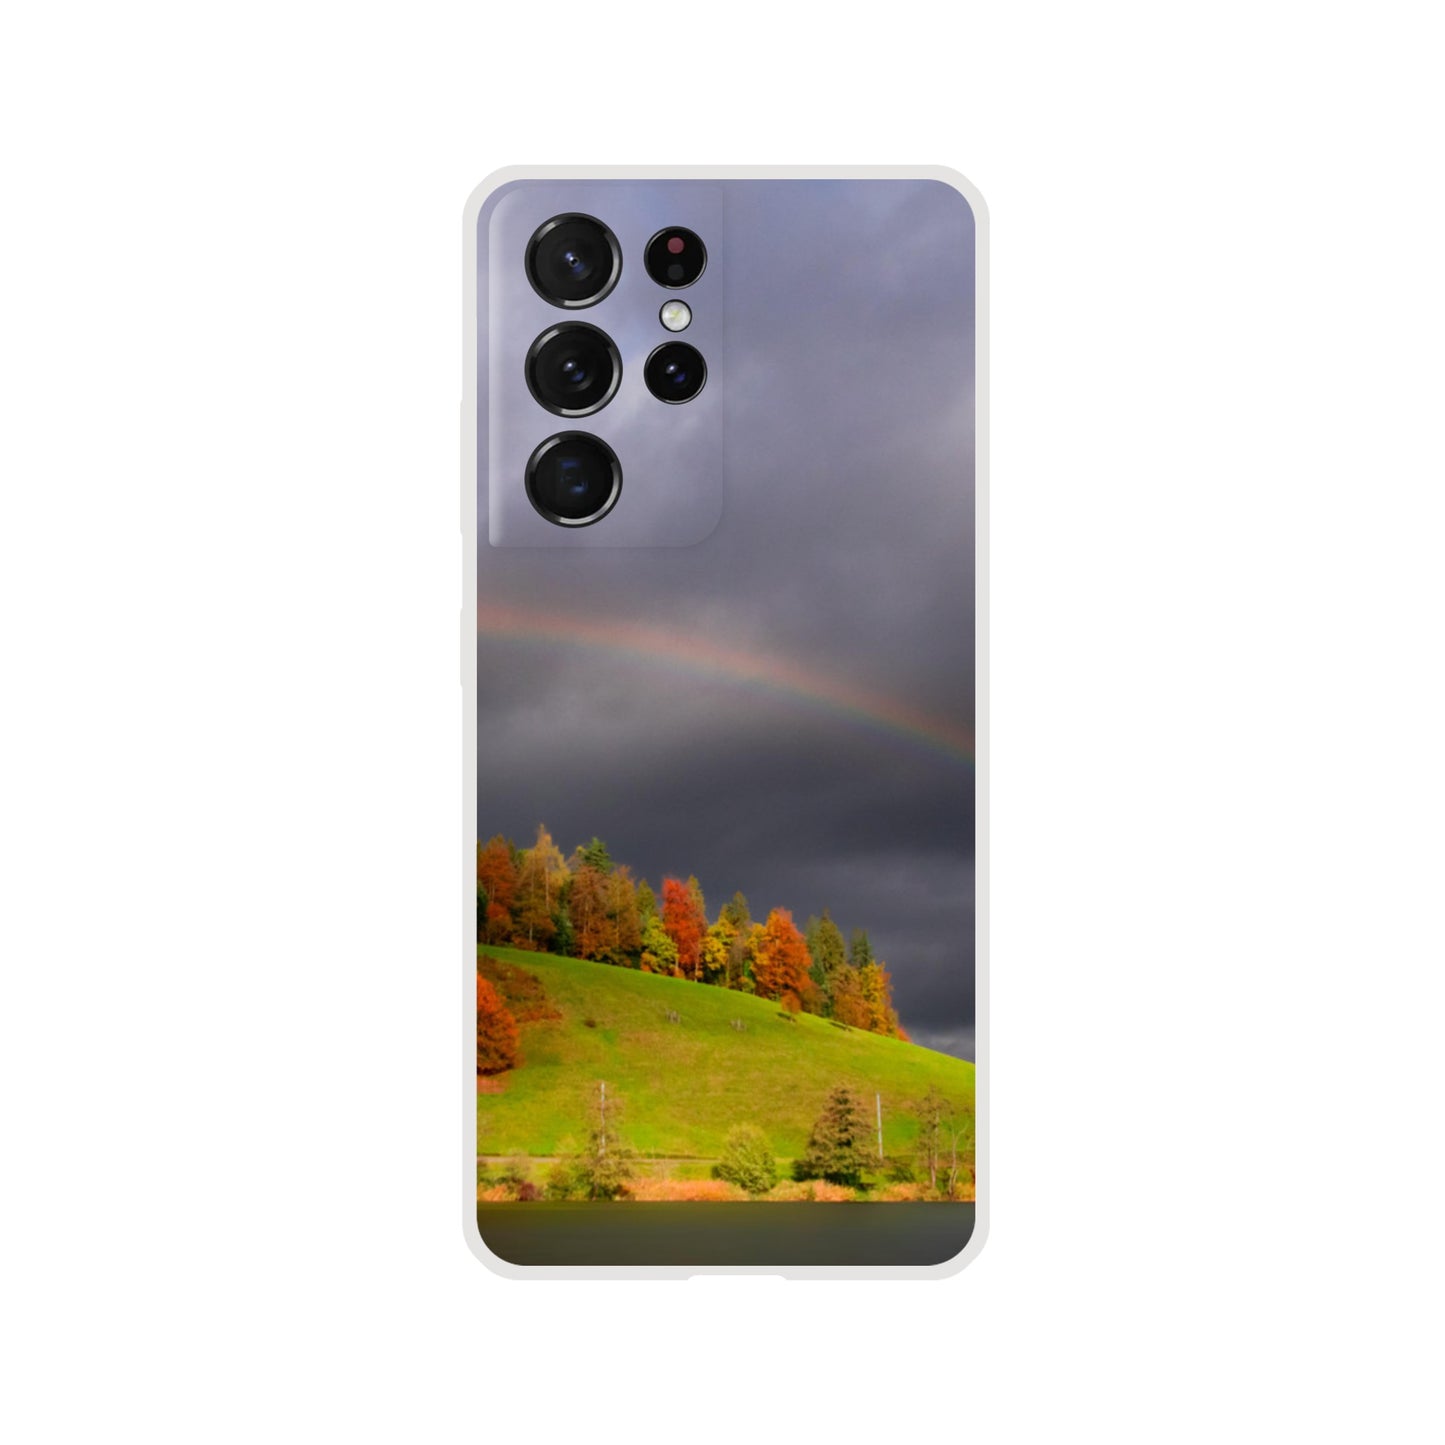 Rainbow motif: Flexi-Case mobile phone case for iPhone and Samsung